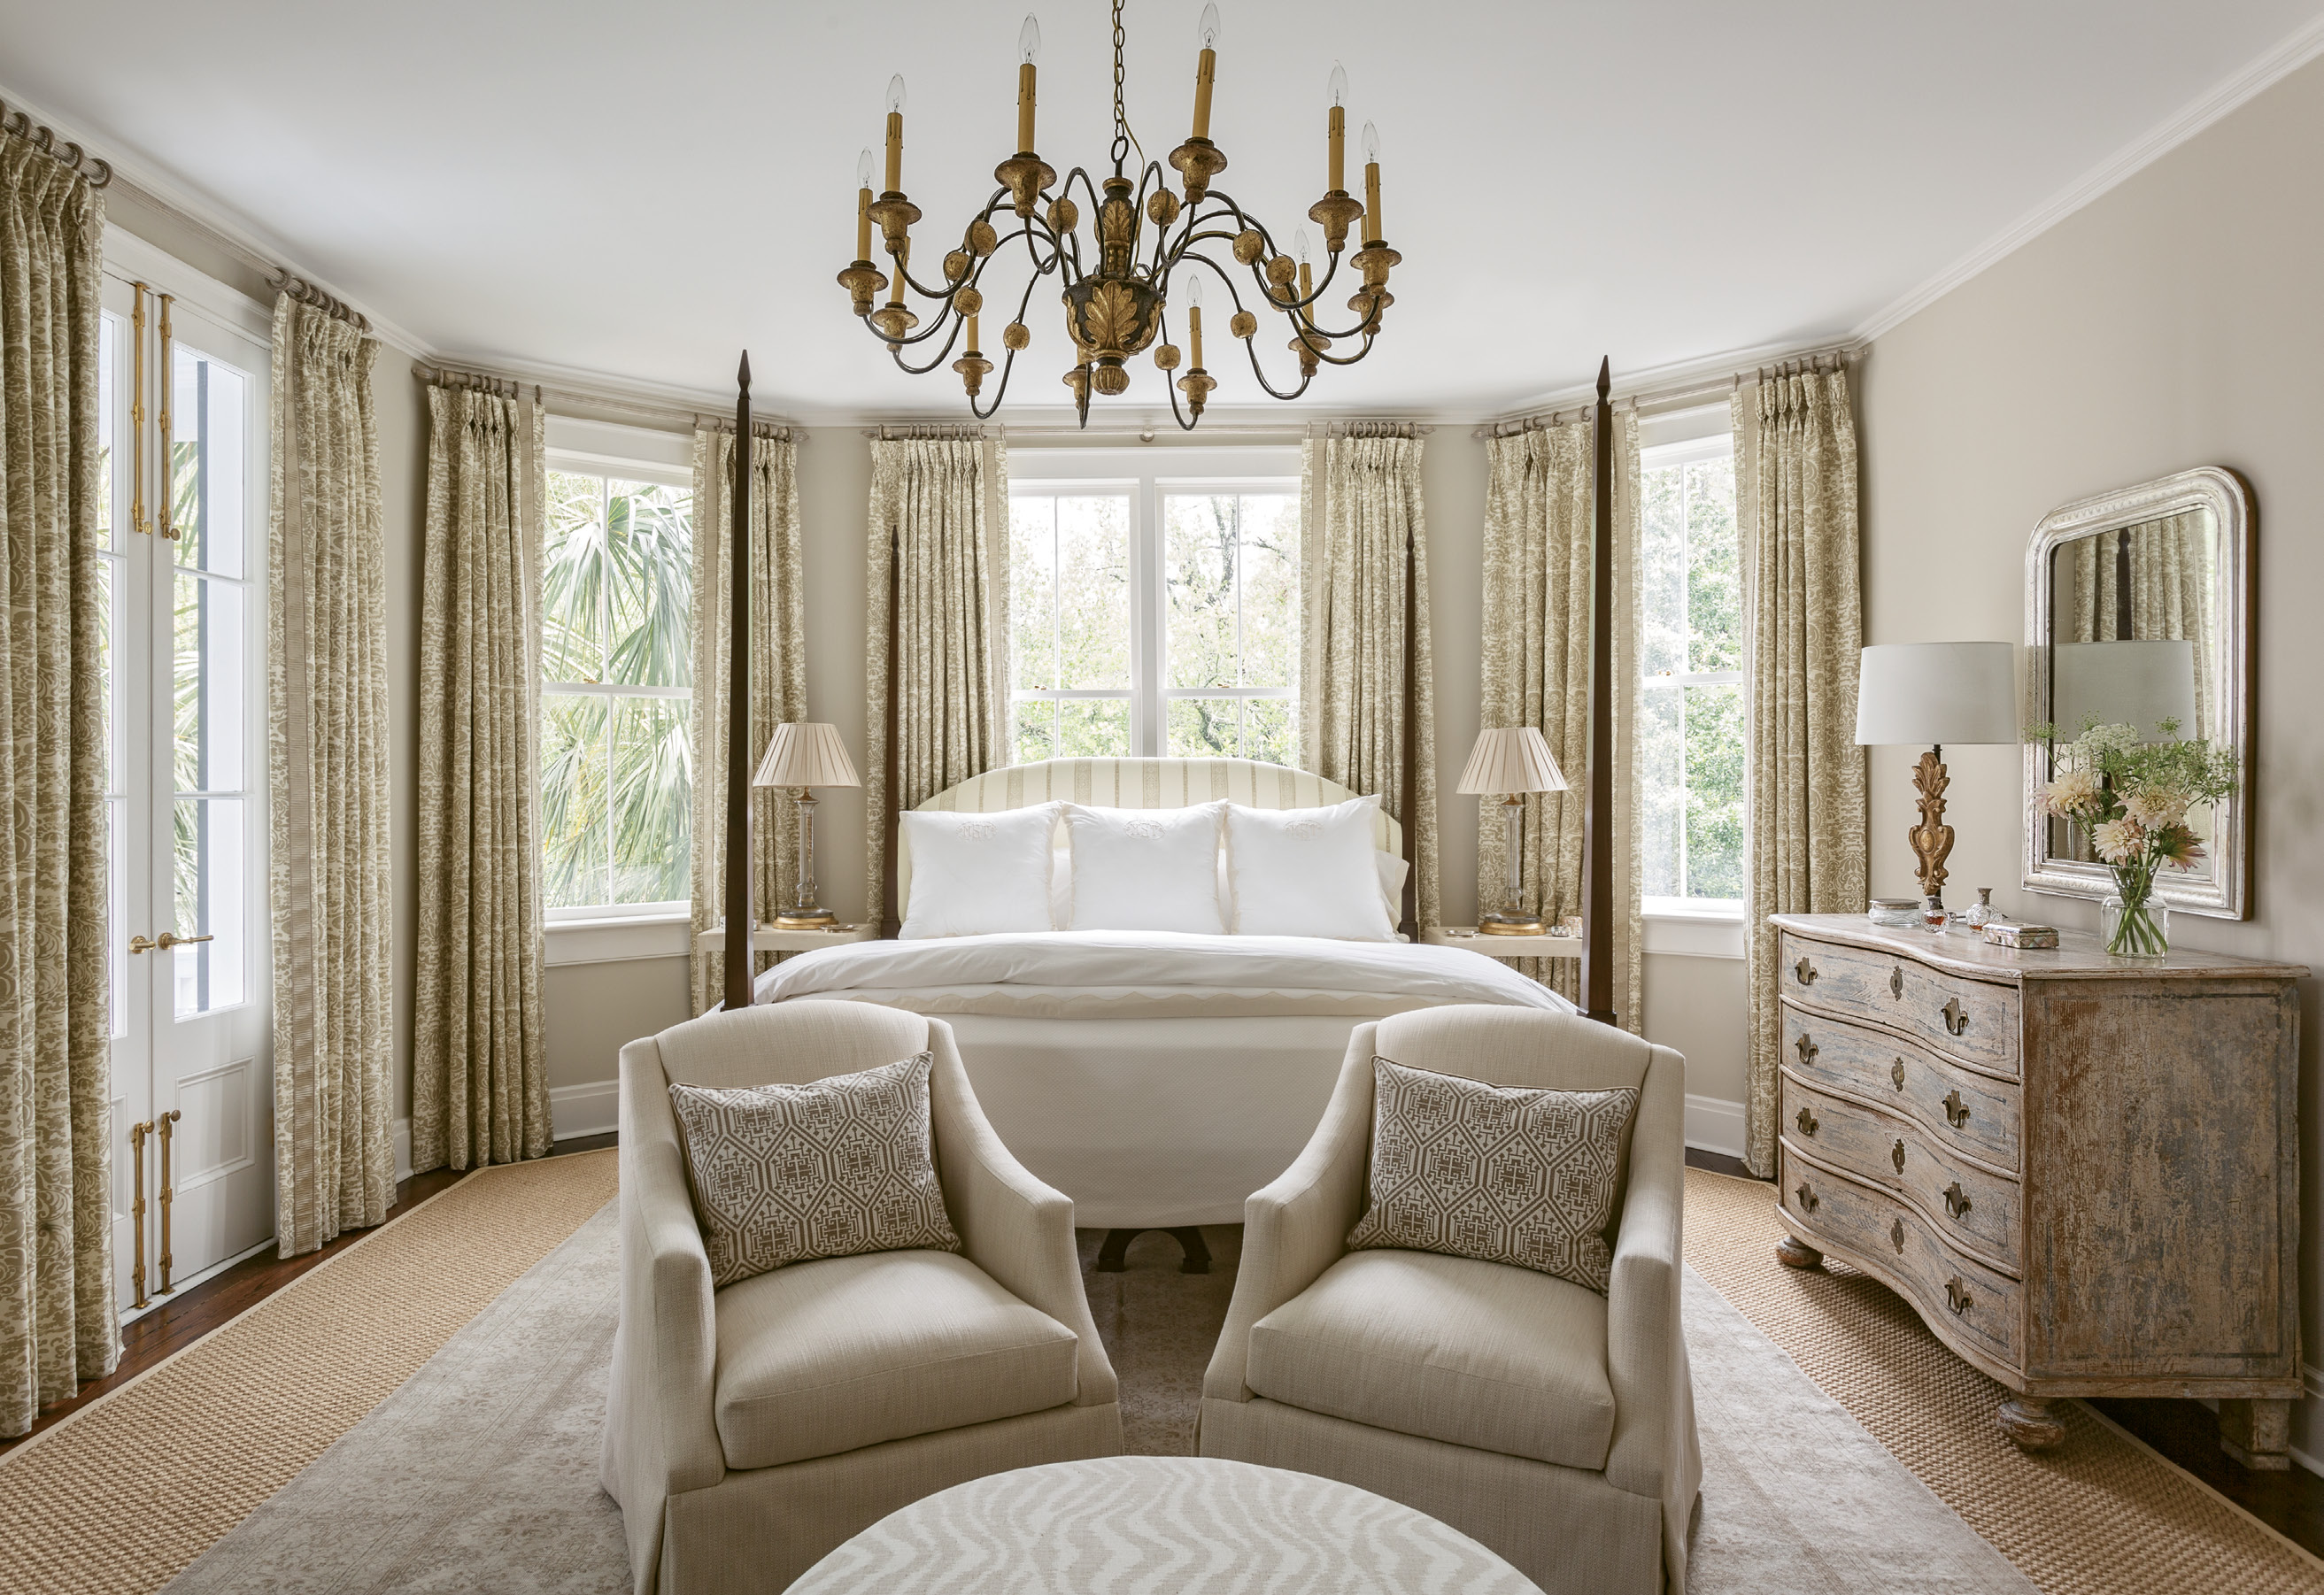 TONY TONES: Taupe, camel, and cream are enlivened with understated patterns and hints of the tropical foliage just beyond the windows in this soothing master bedroom, with a custom poster bed by North Charleston’s Nietert Antique Restorations.